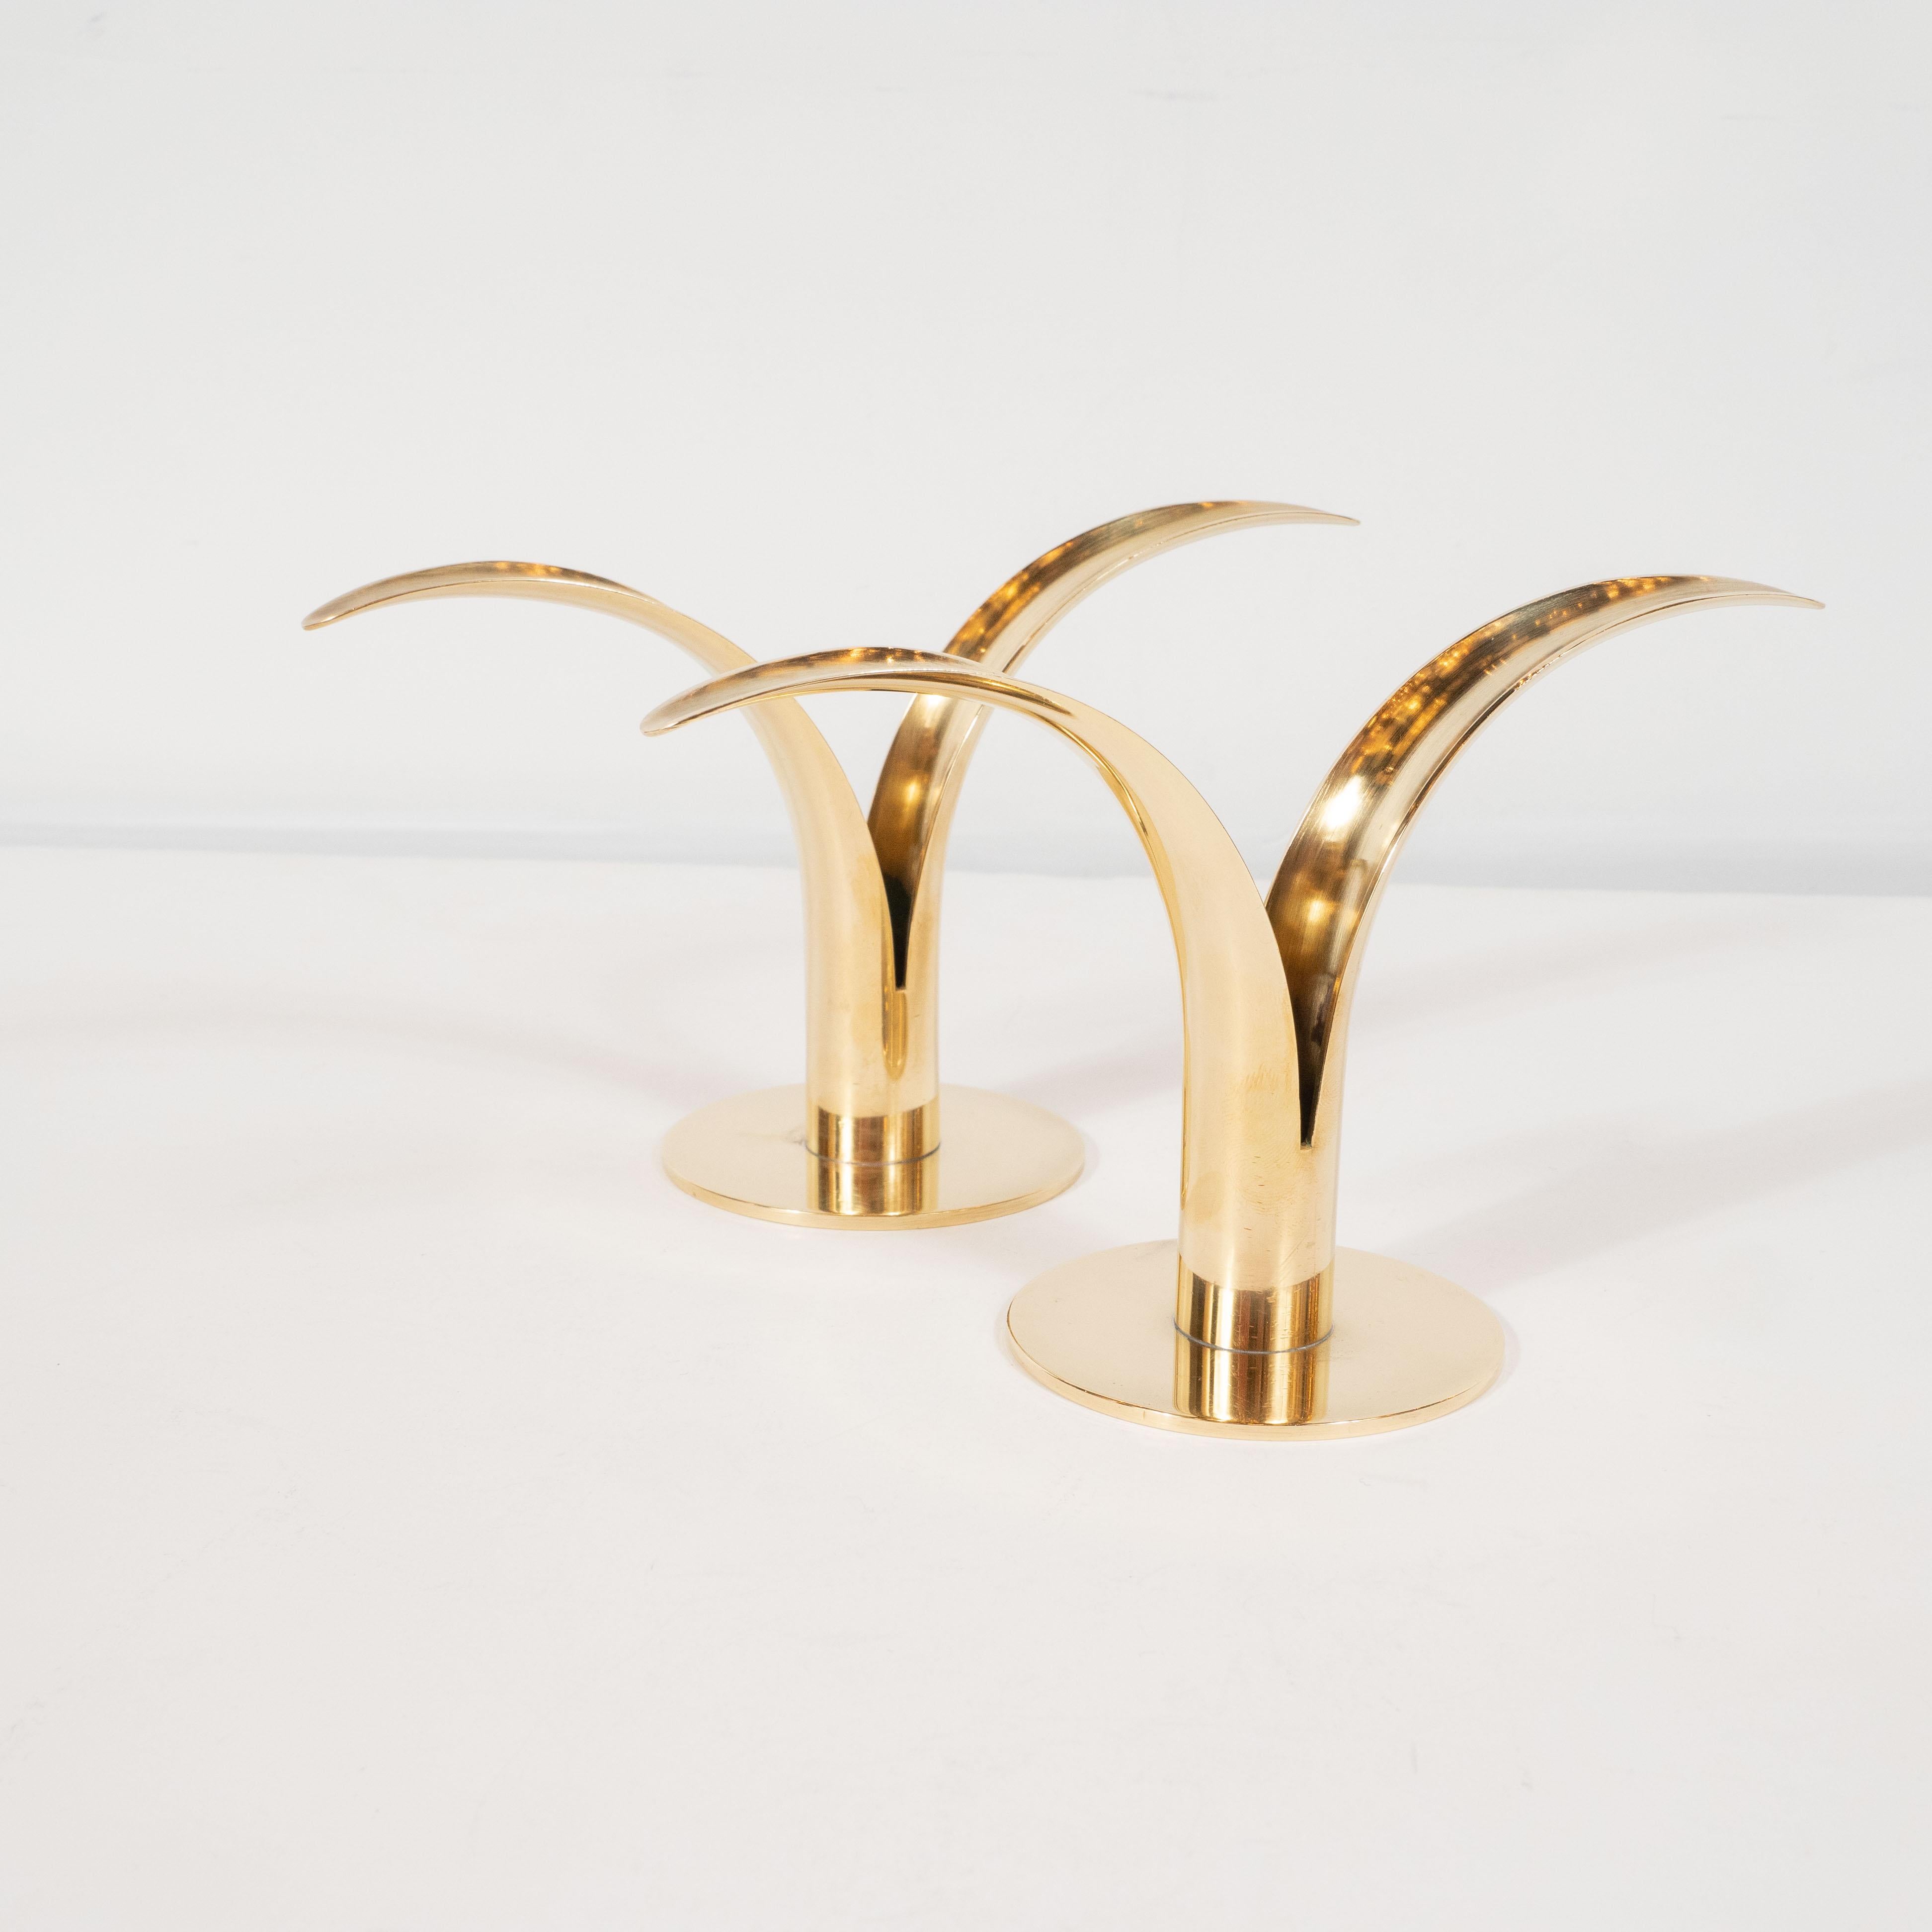 Pair of Mid-Century Modern Polished Brass Lily Candleholders by Konst of Sweden In Excellent Condition For Sale In New York, NY